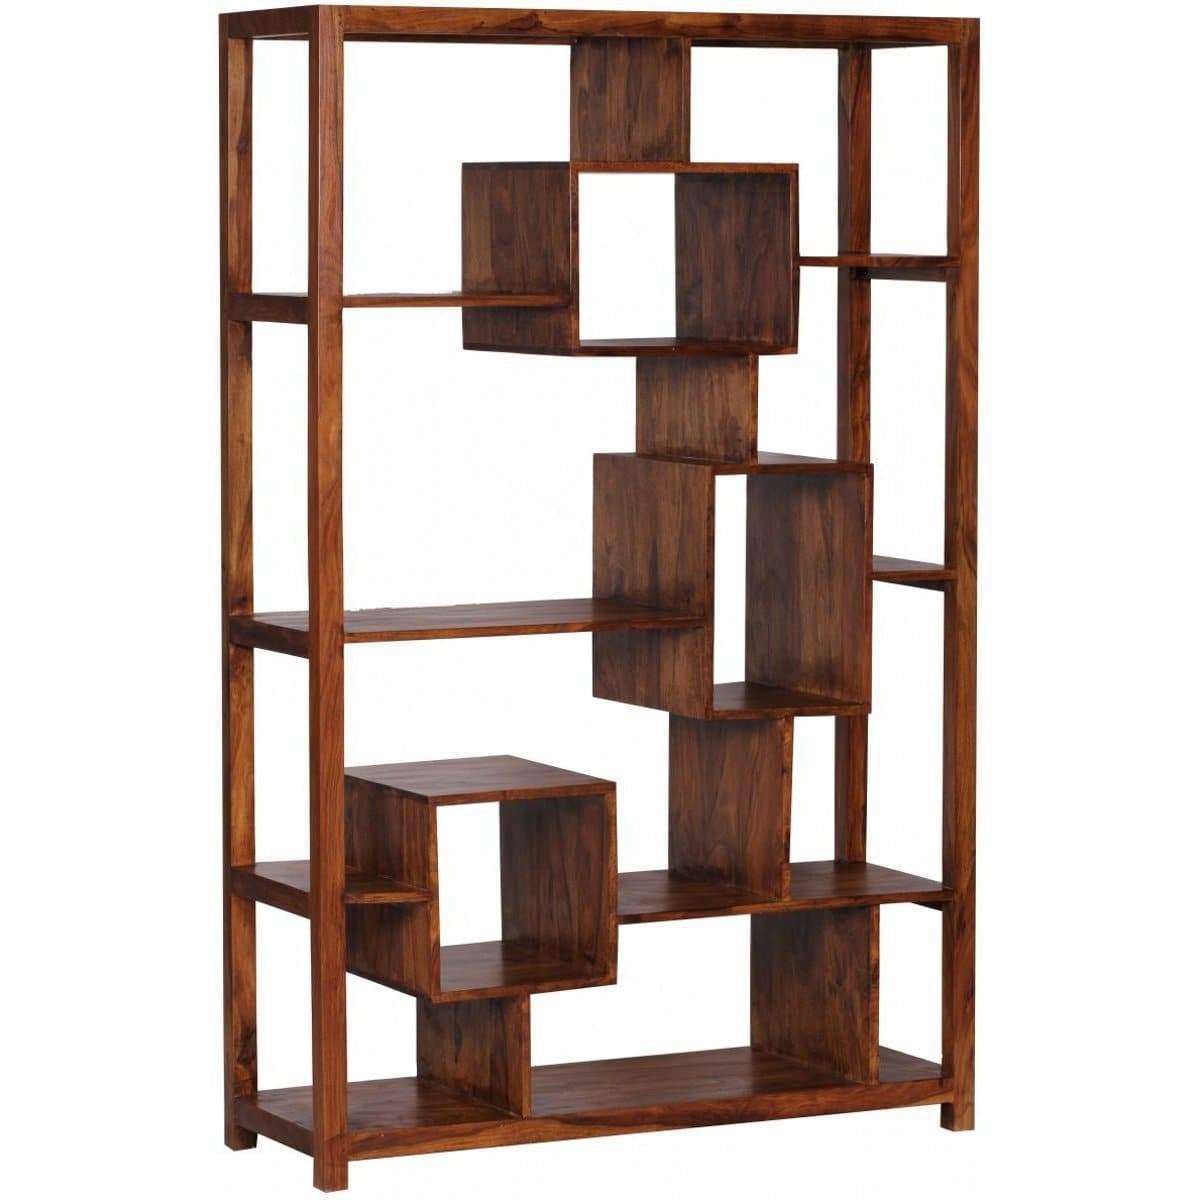 Nancy's Lexington Sheesham Solid Wood Bookcase - Wall Cabinet - Cabinets - Bookcases